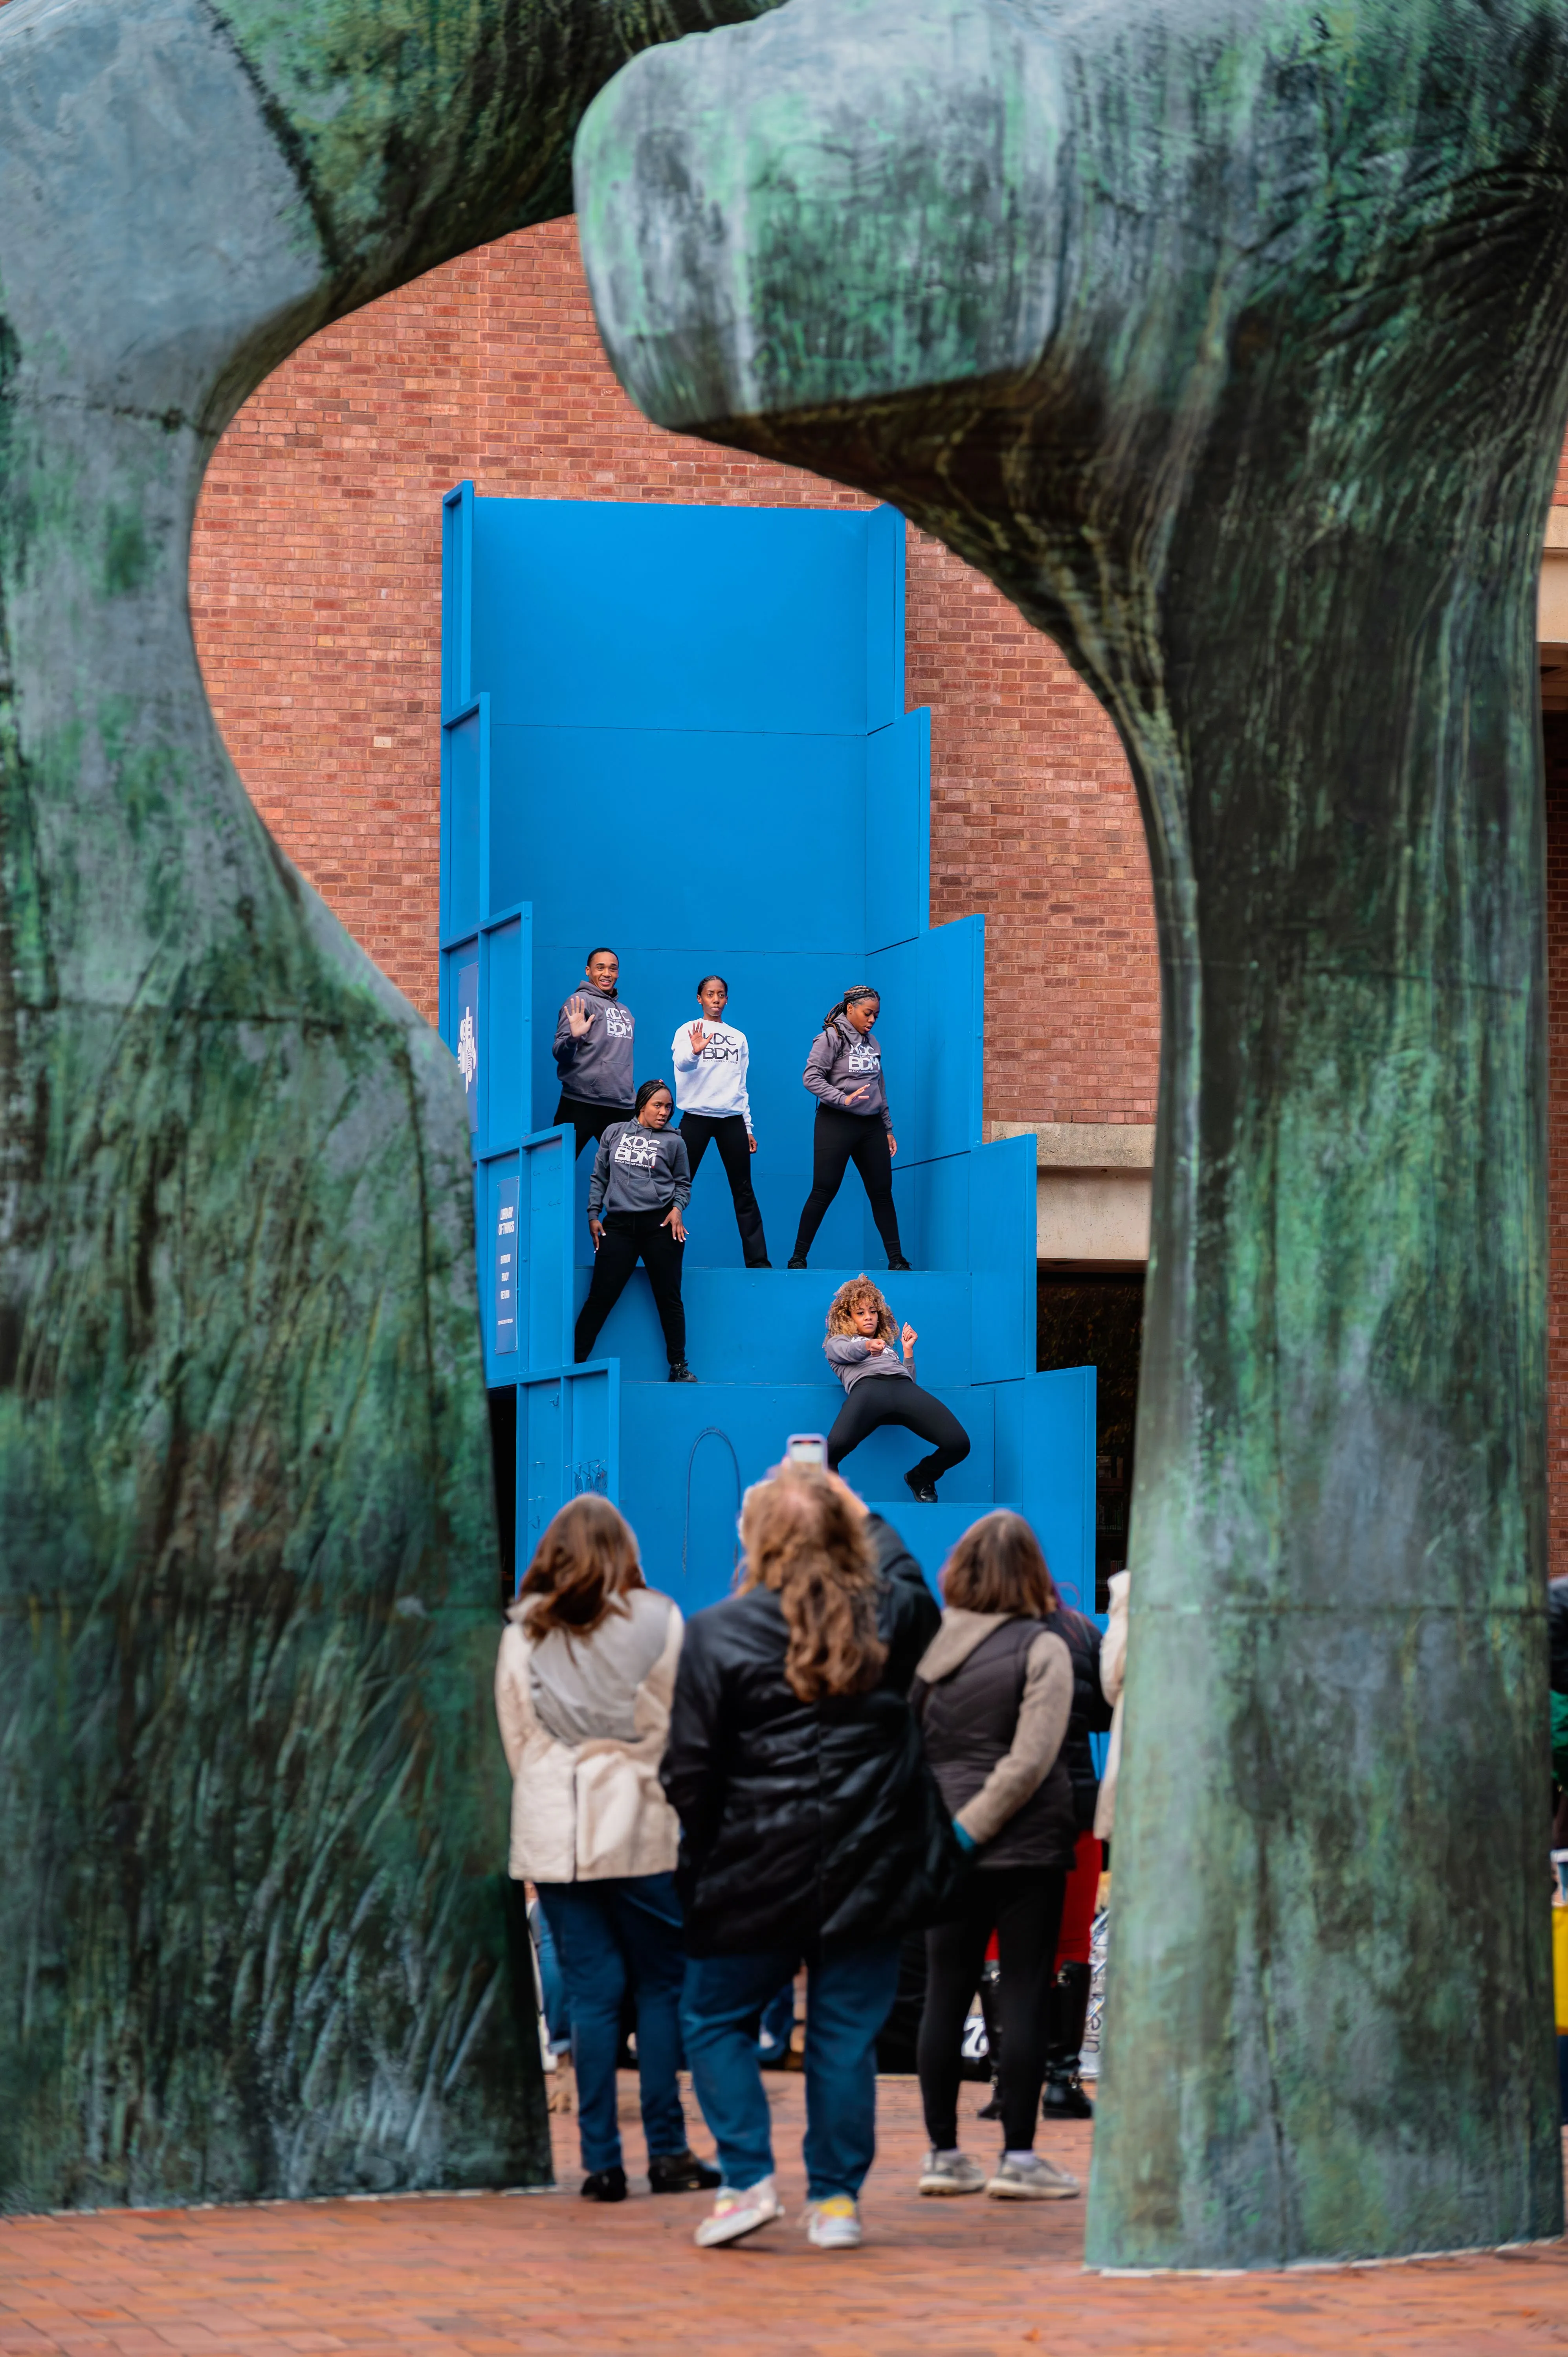 Group of people observing a blue art installation with a mirrored surface on an outdoor wall.